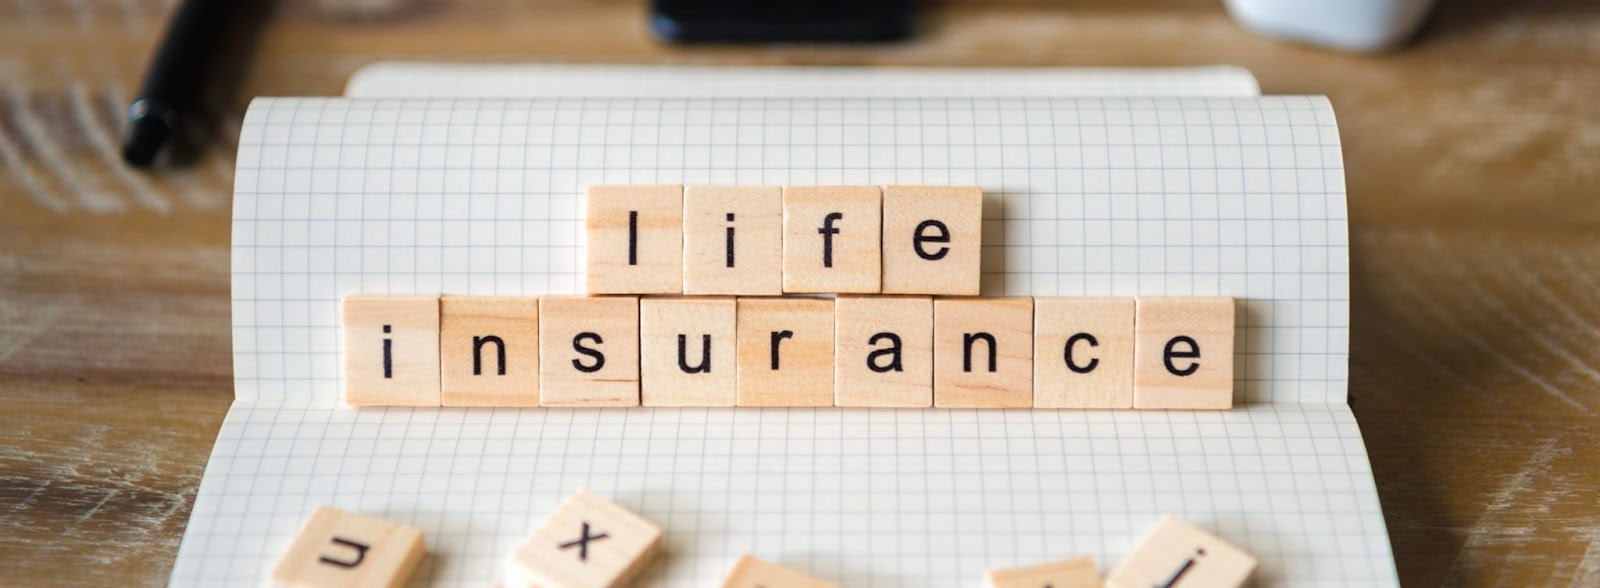 whole life insurance for business owners